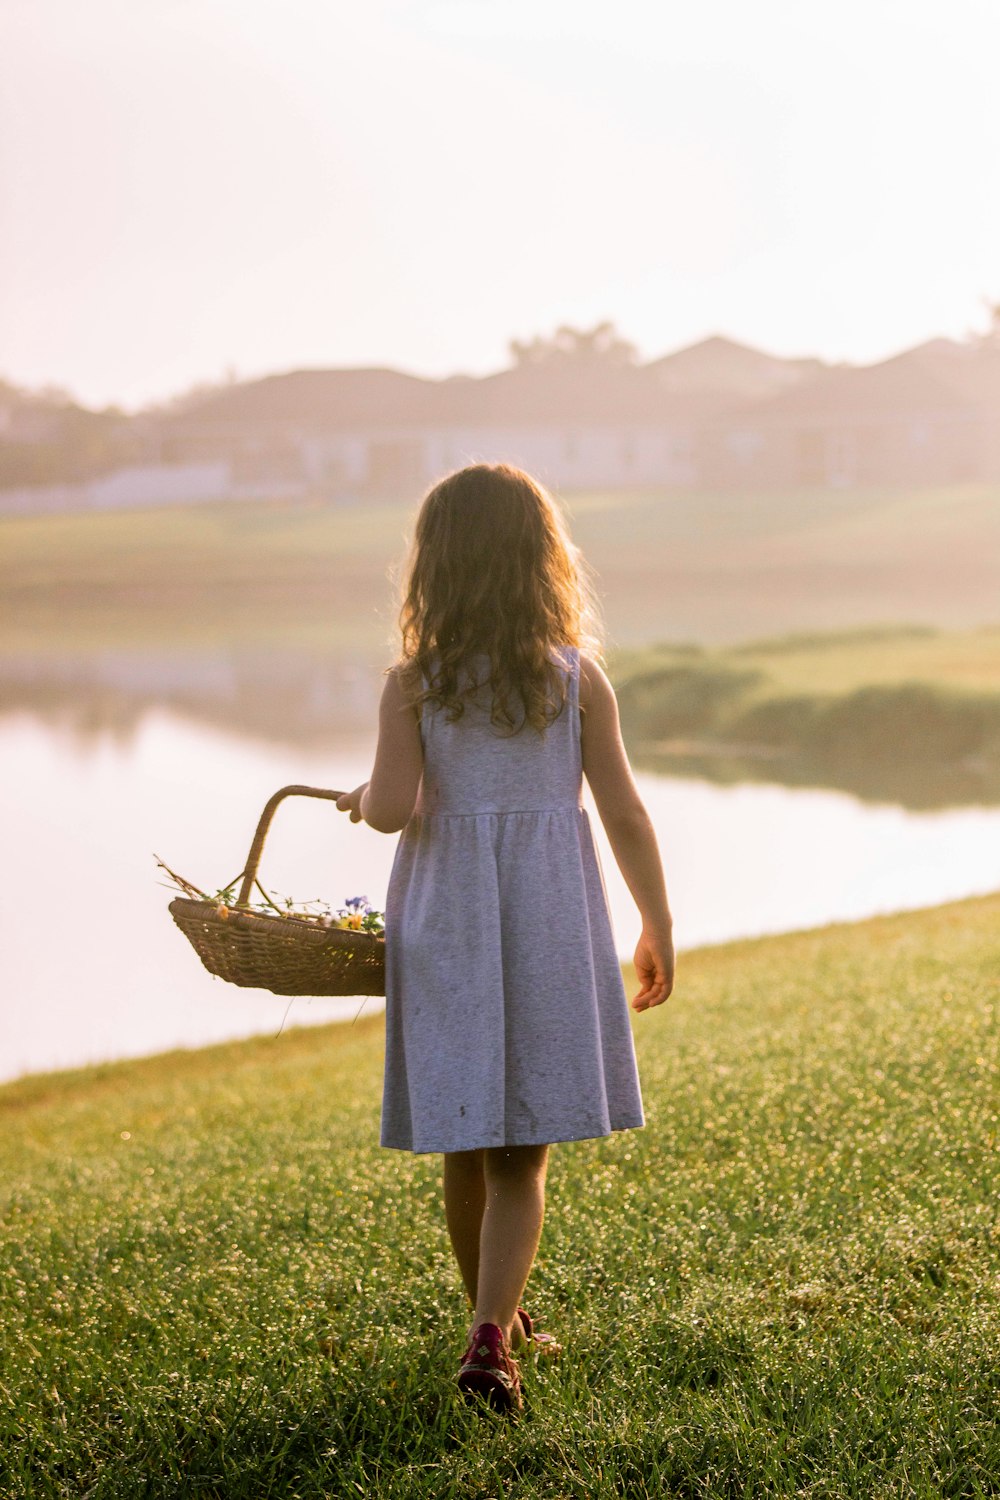 girl in white dress holding brown woven basket walking on green grass field during daytime